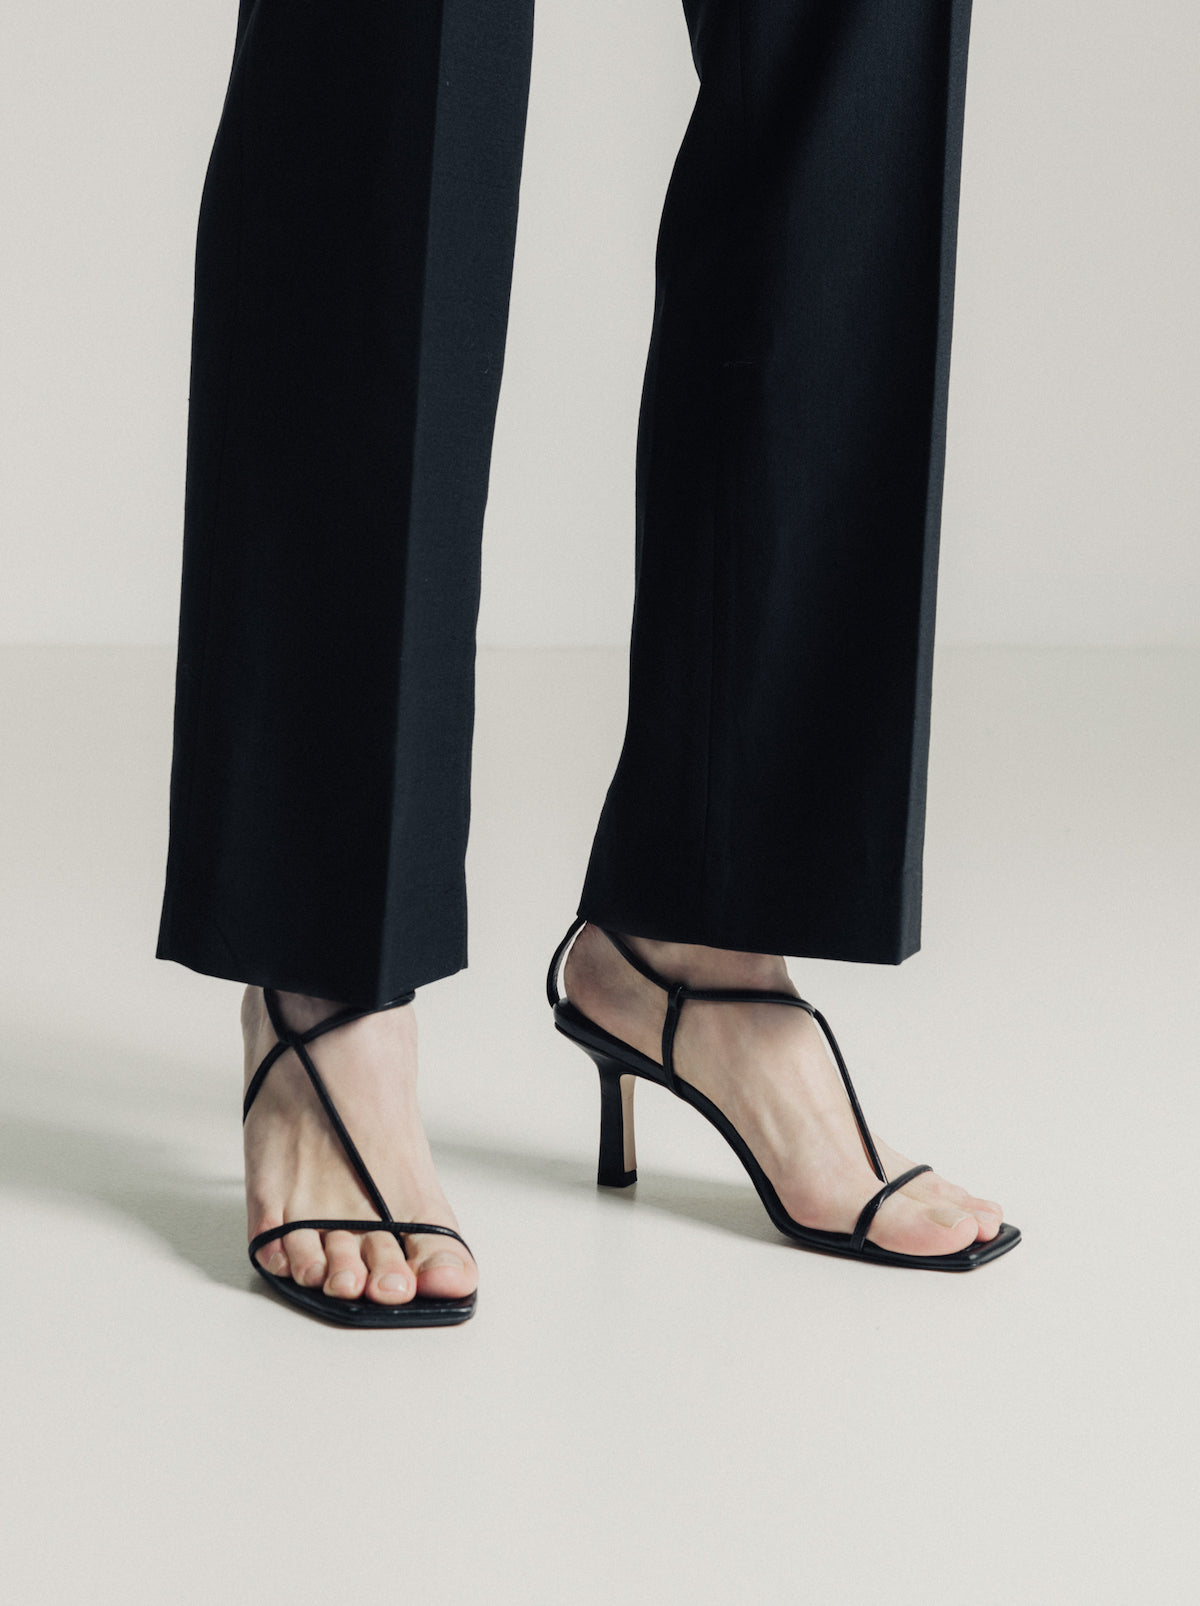 Leather strappy sandals - Black - Ladies | H&M IN